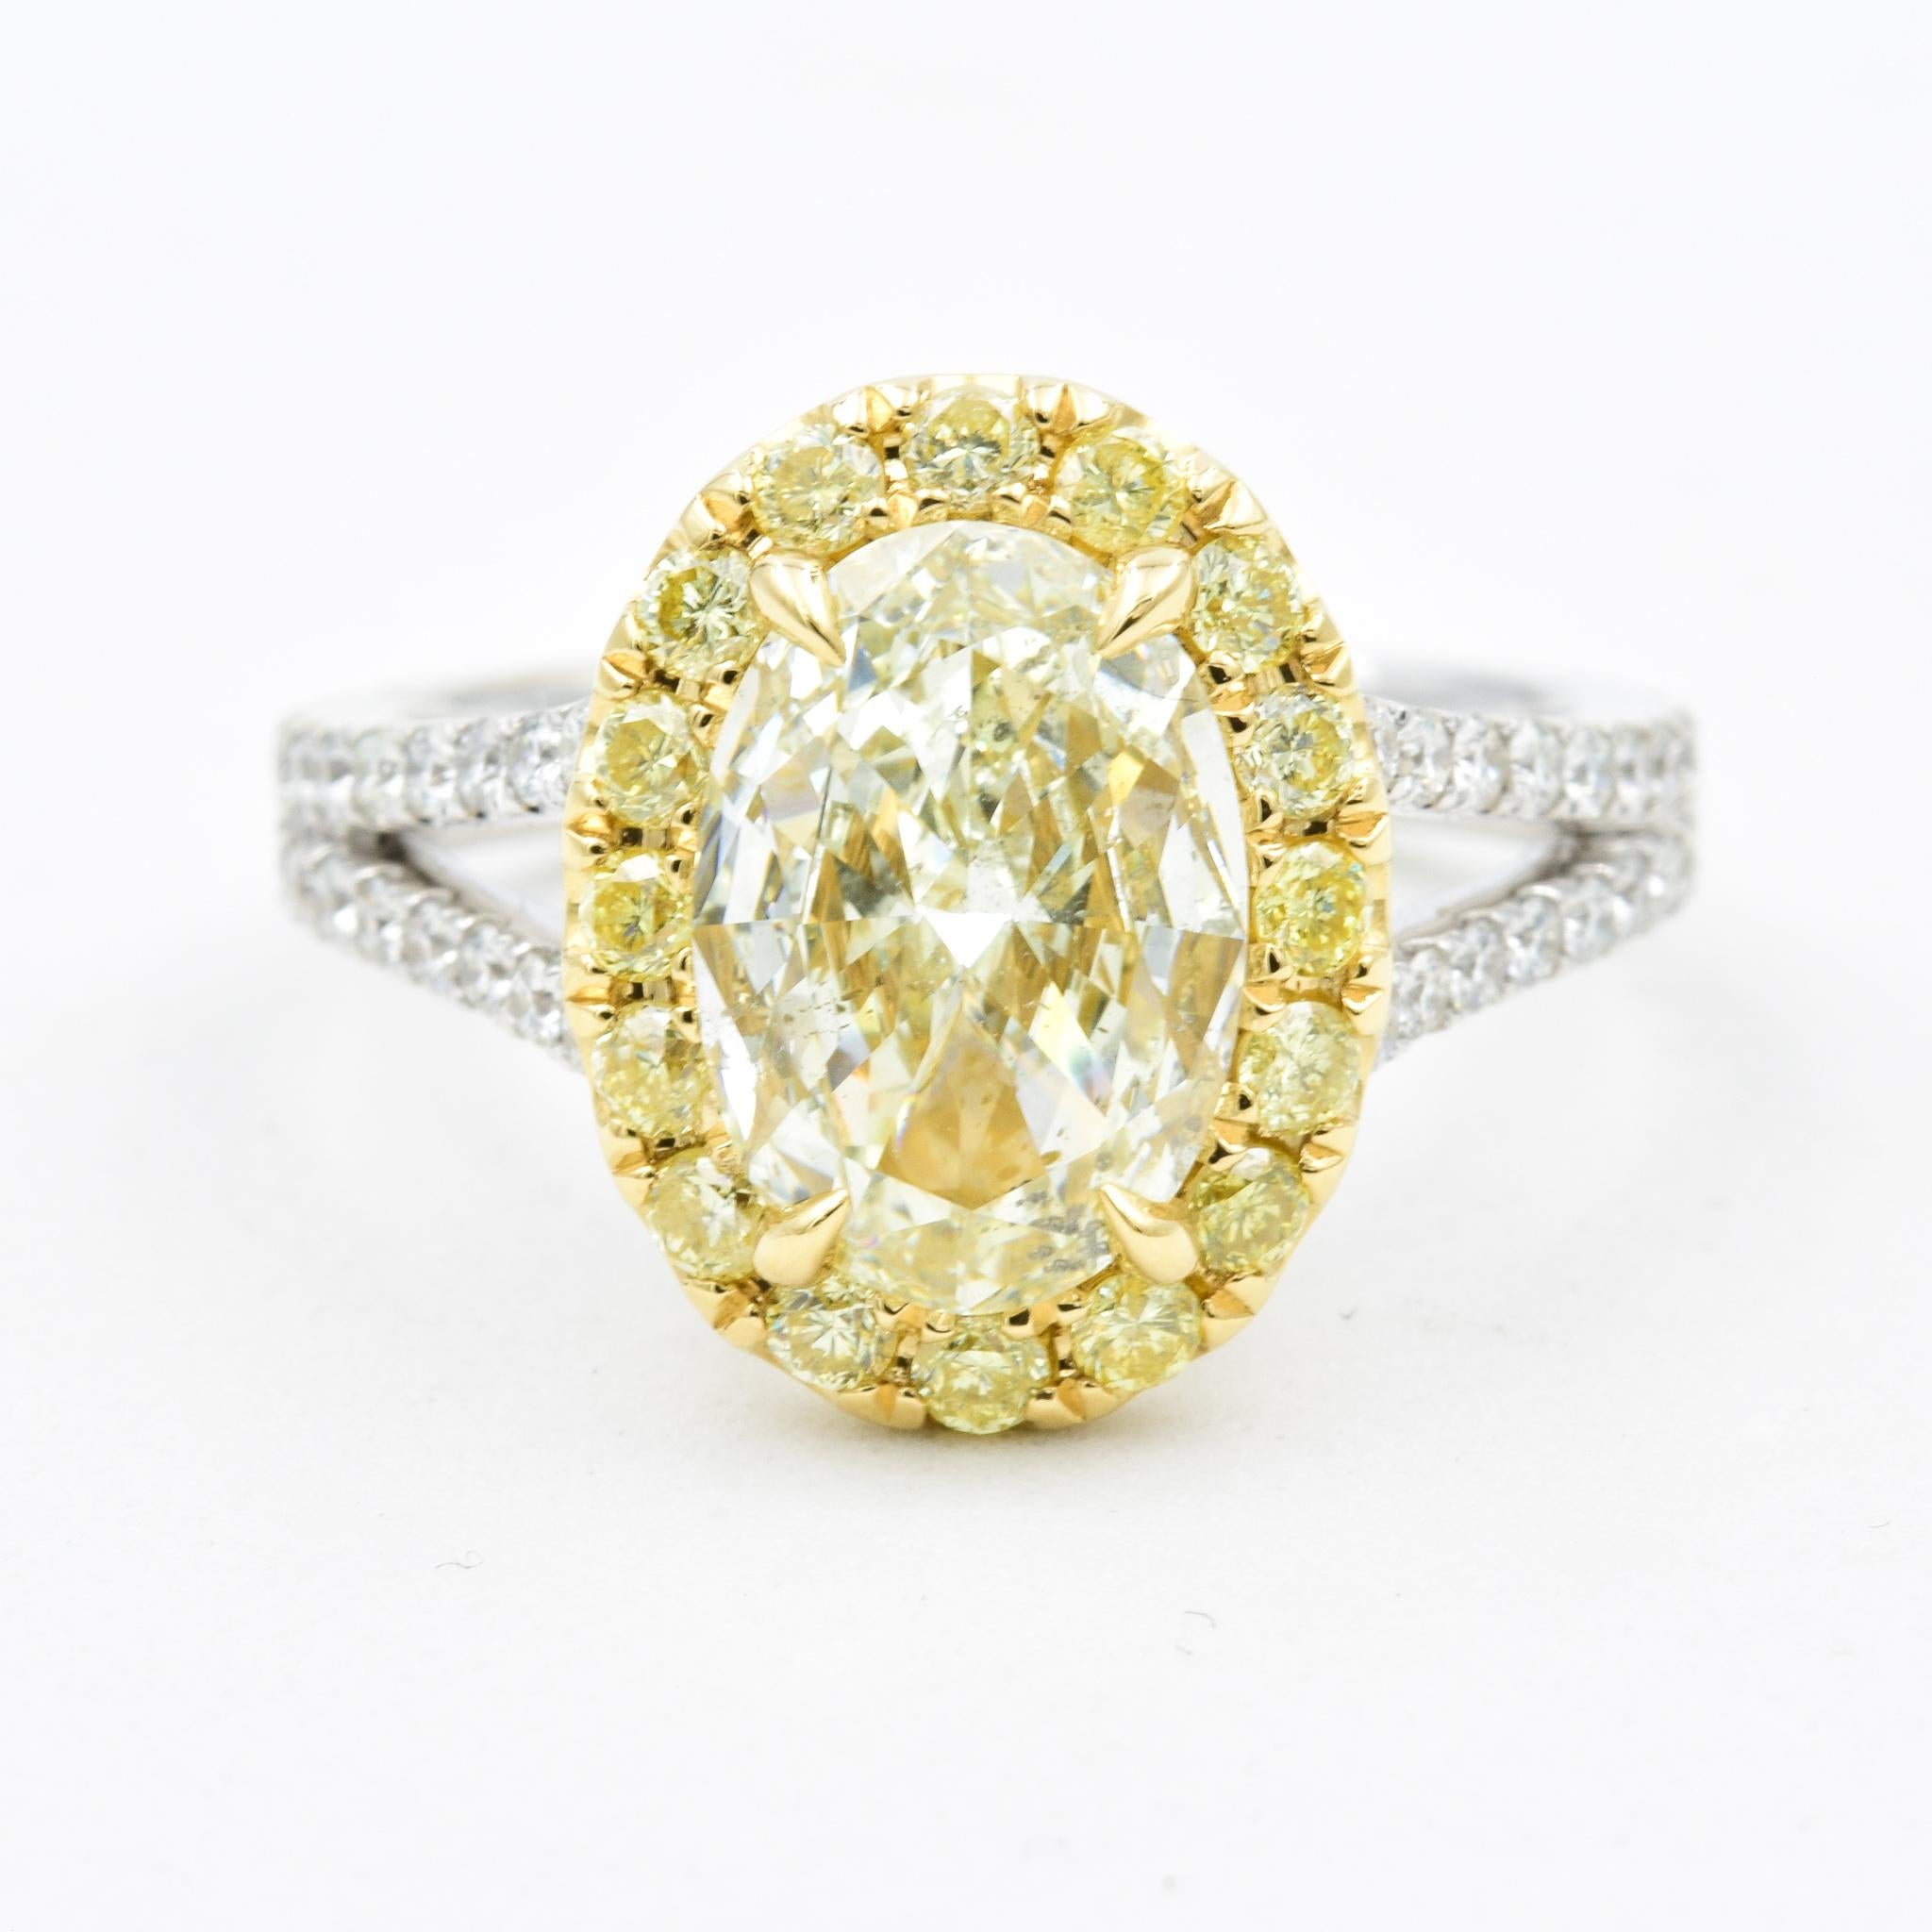 This beautiful diamond ring features a 2.02 carat Fancy Light Yellow diamond in an oval cut.  The diamond is accented by 0.46 carats of yellow diamonds set in 18k yellow gold.  The remainder of the mounting with the split shank style in 18k white